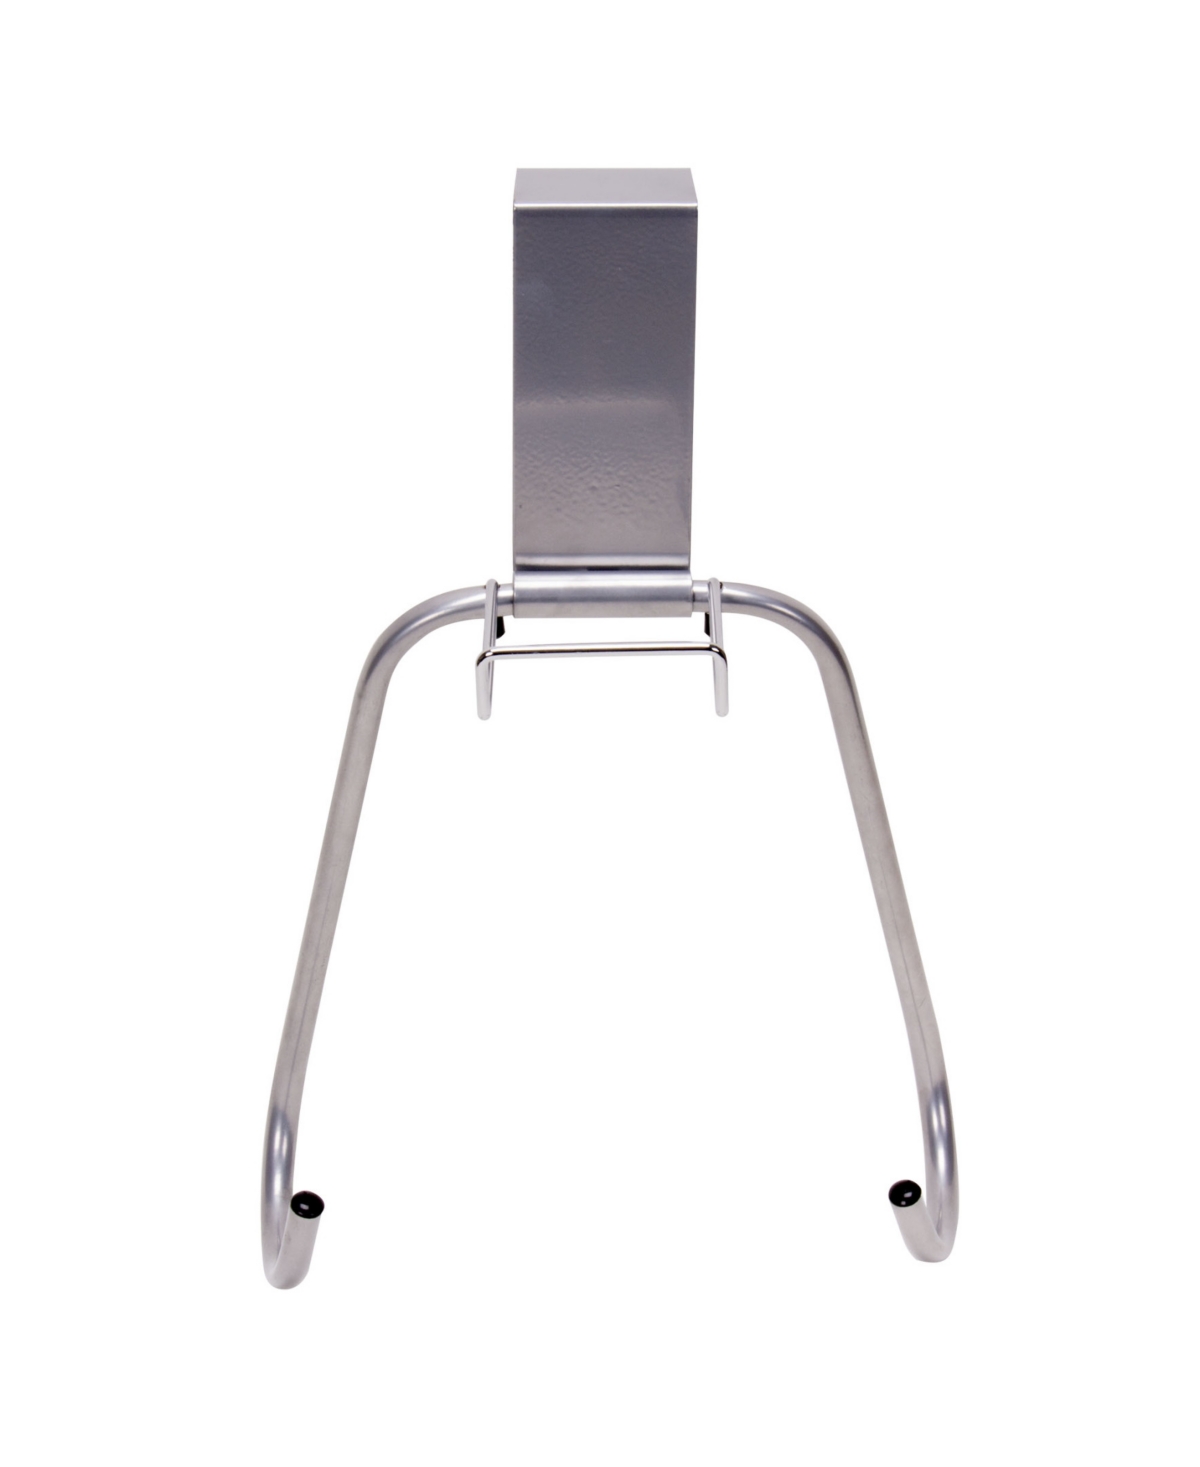 Over The Door Iron Board Holder - Silver